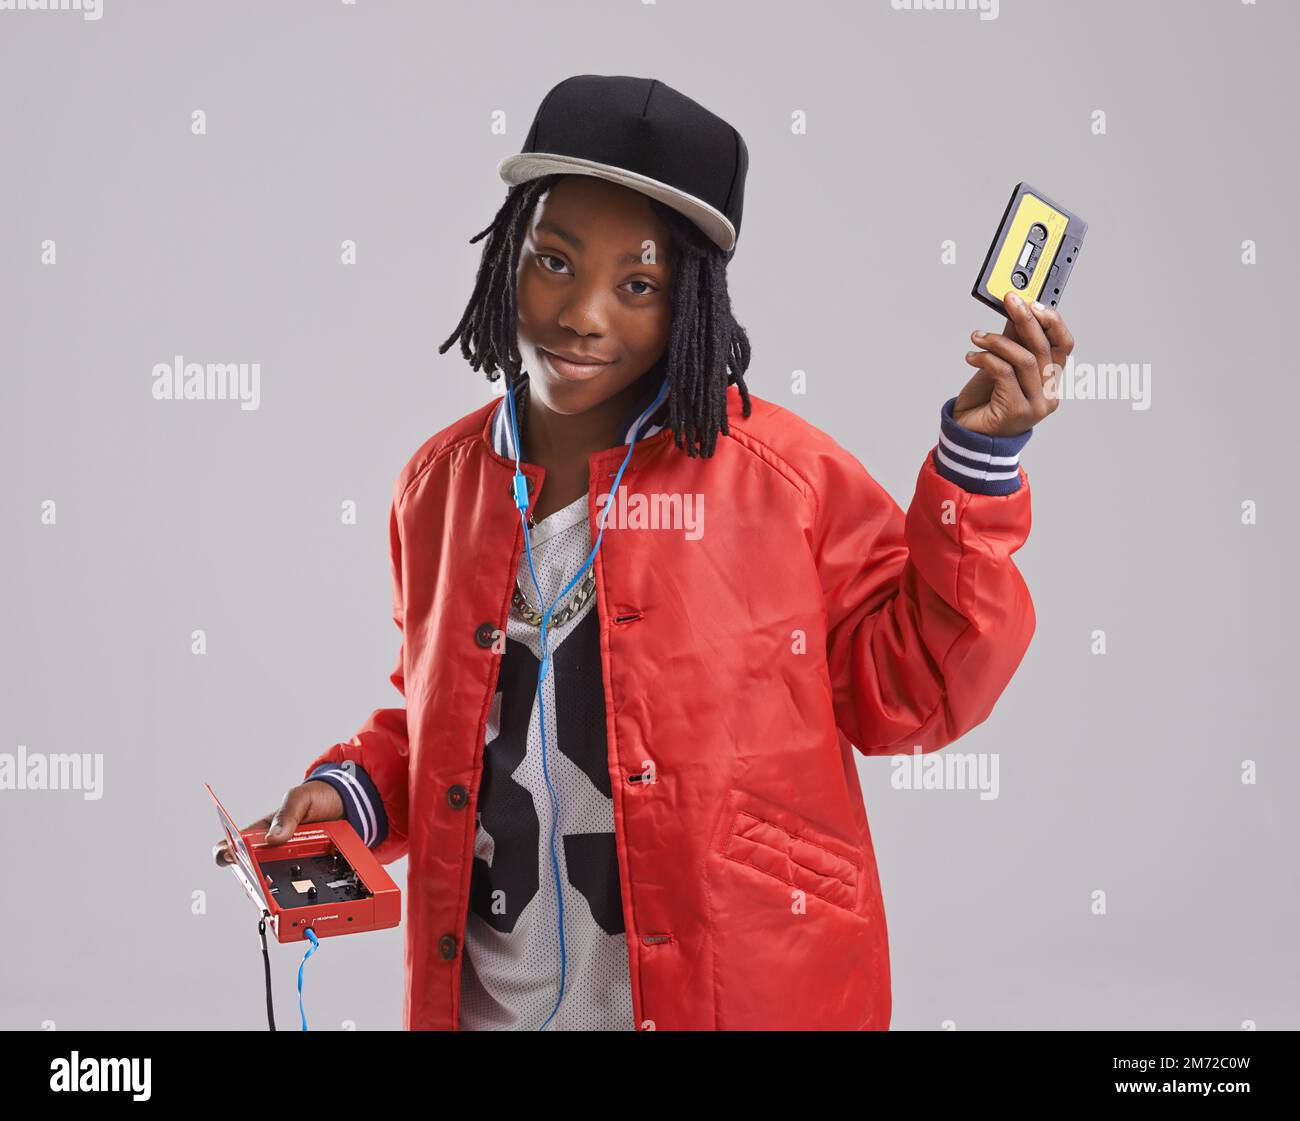 Rocking it old school. Studio shot of a young boy dressed in hip hop attire. Stock Photo